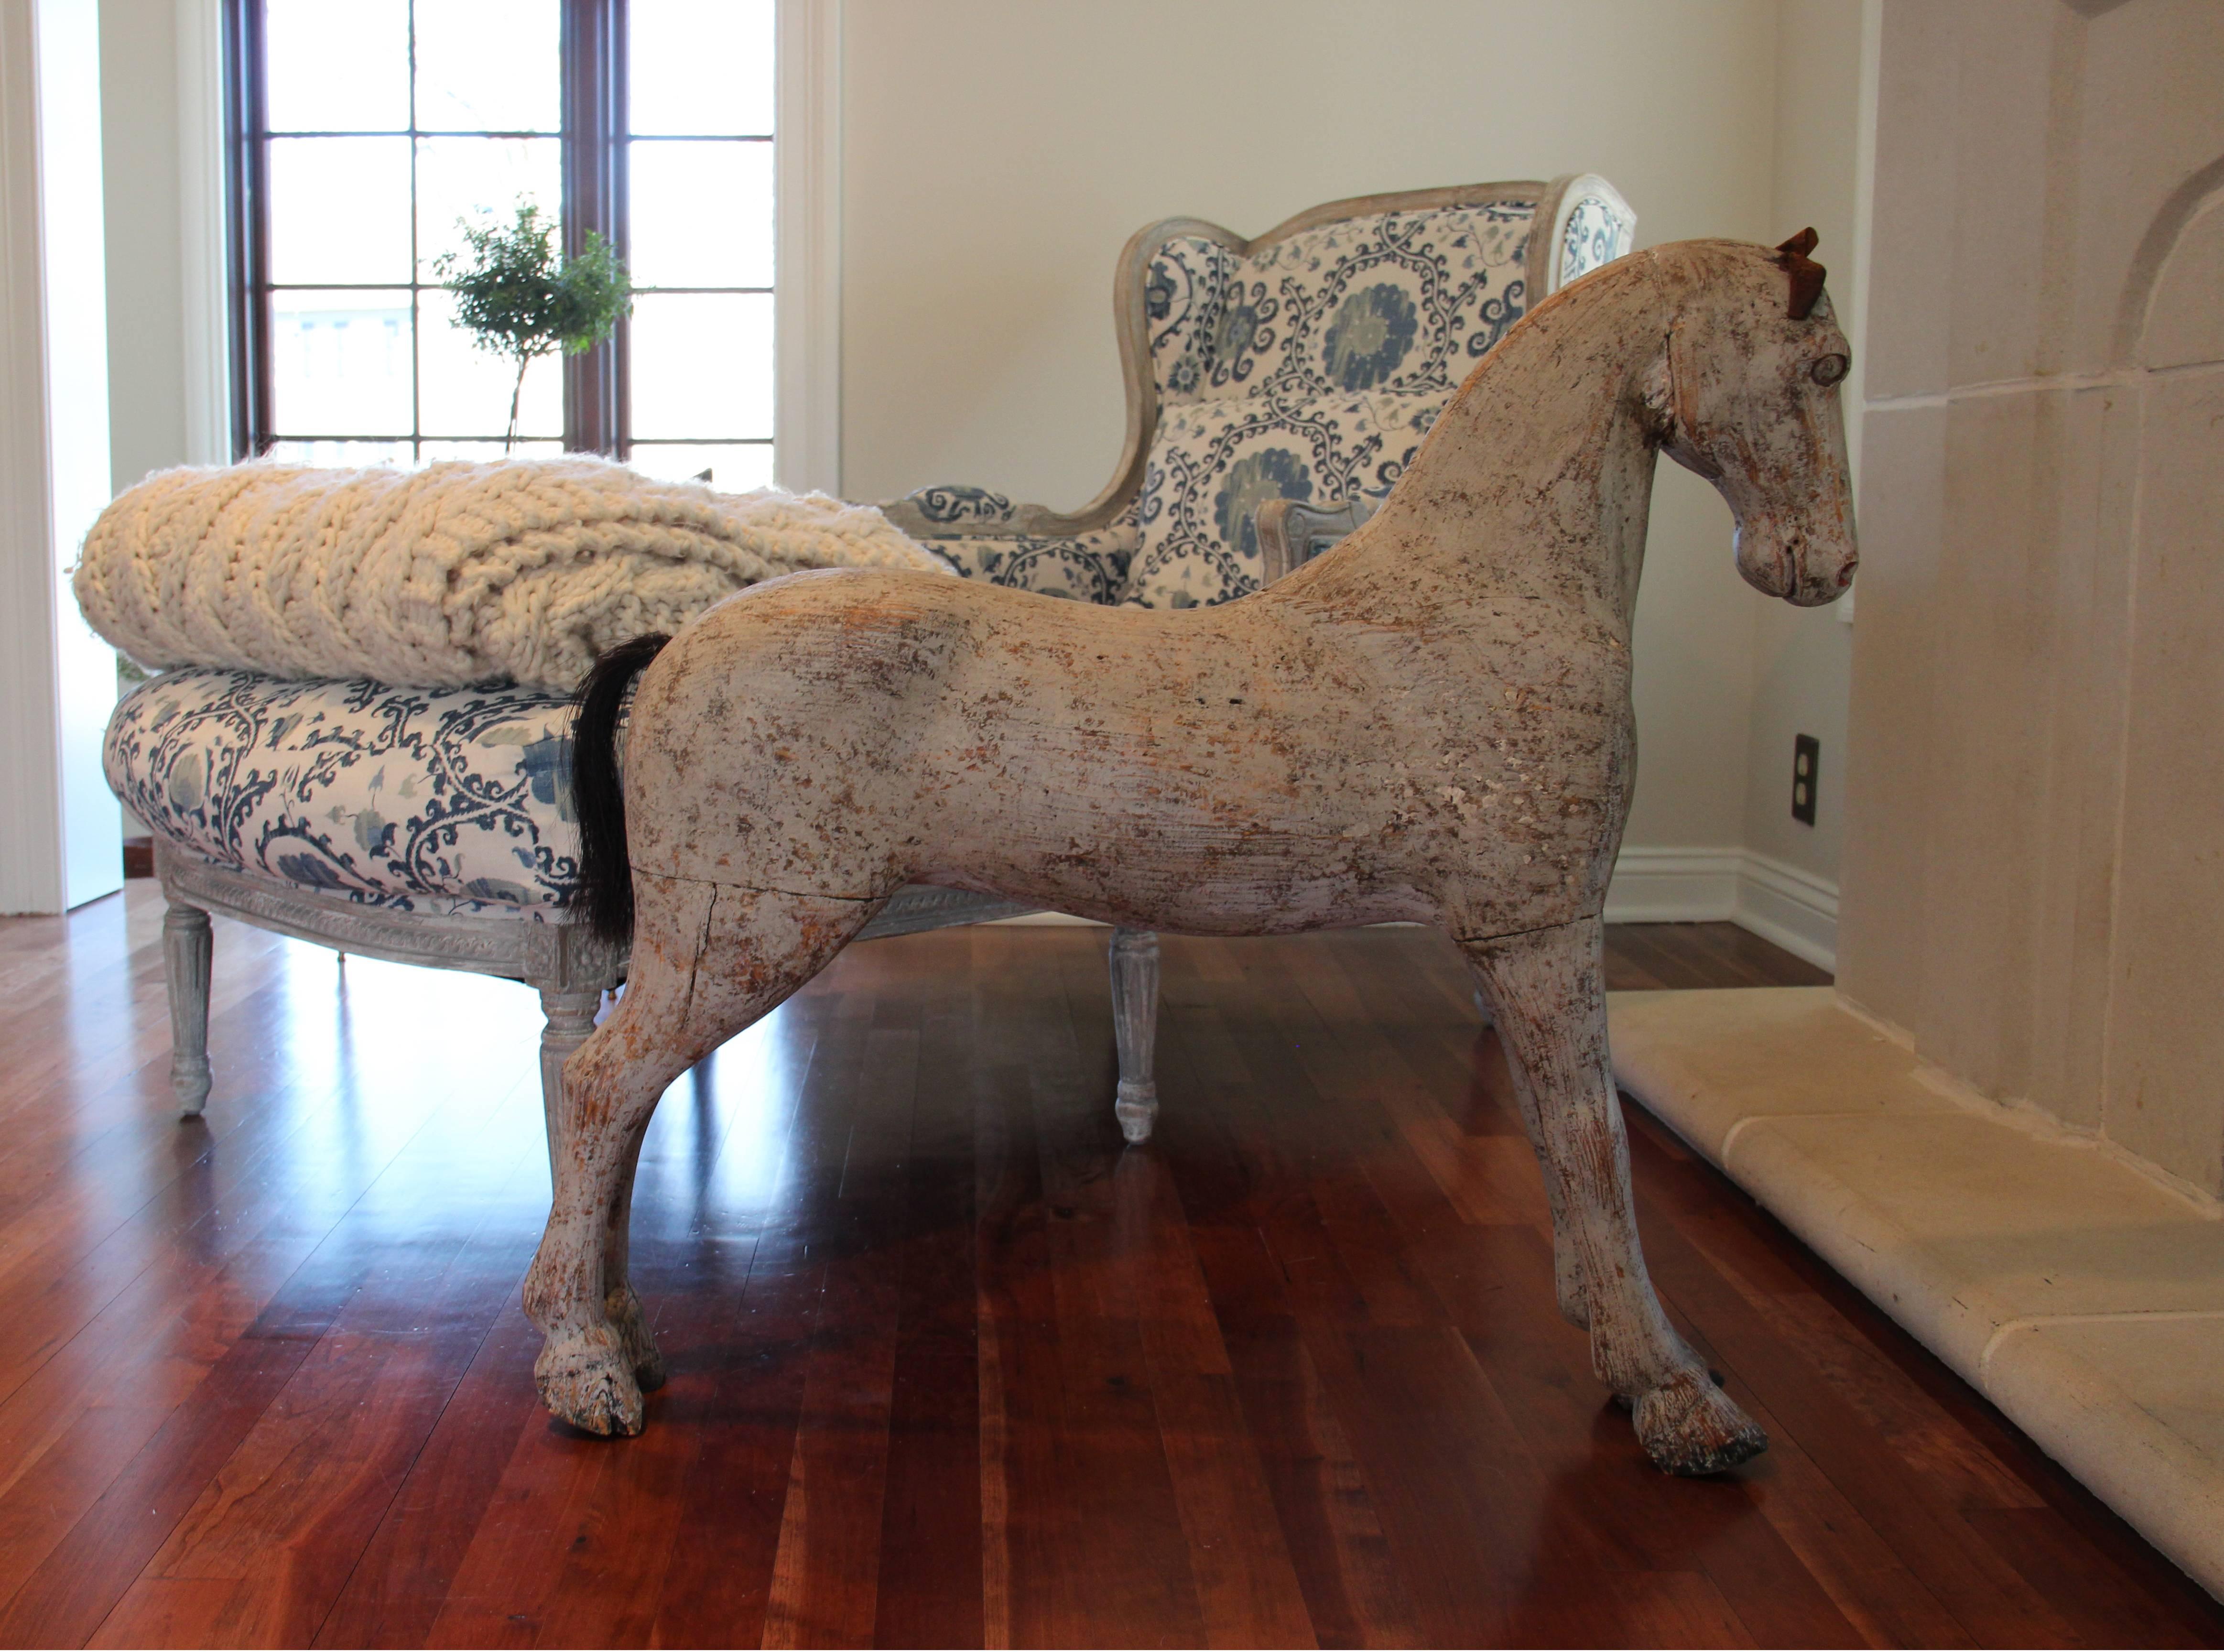 Such a handsome fellow, our Ozzie! A Swedish painted toy horse from the 19th century with original leather ears and horse hair tail. The aged old white or gray patina is stunning.